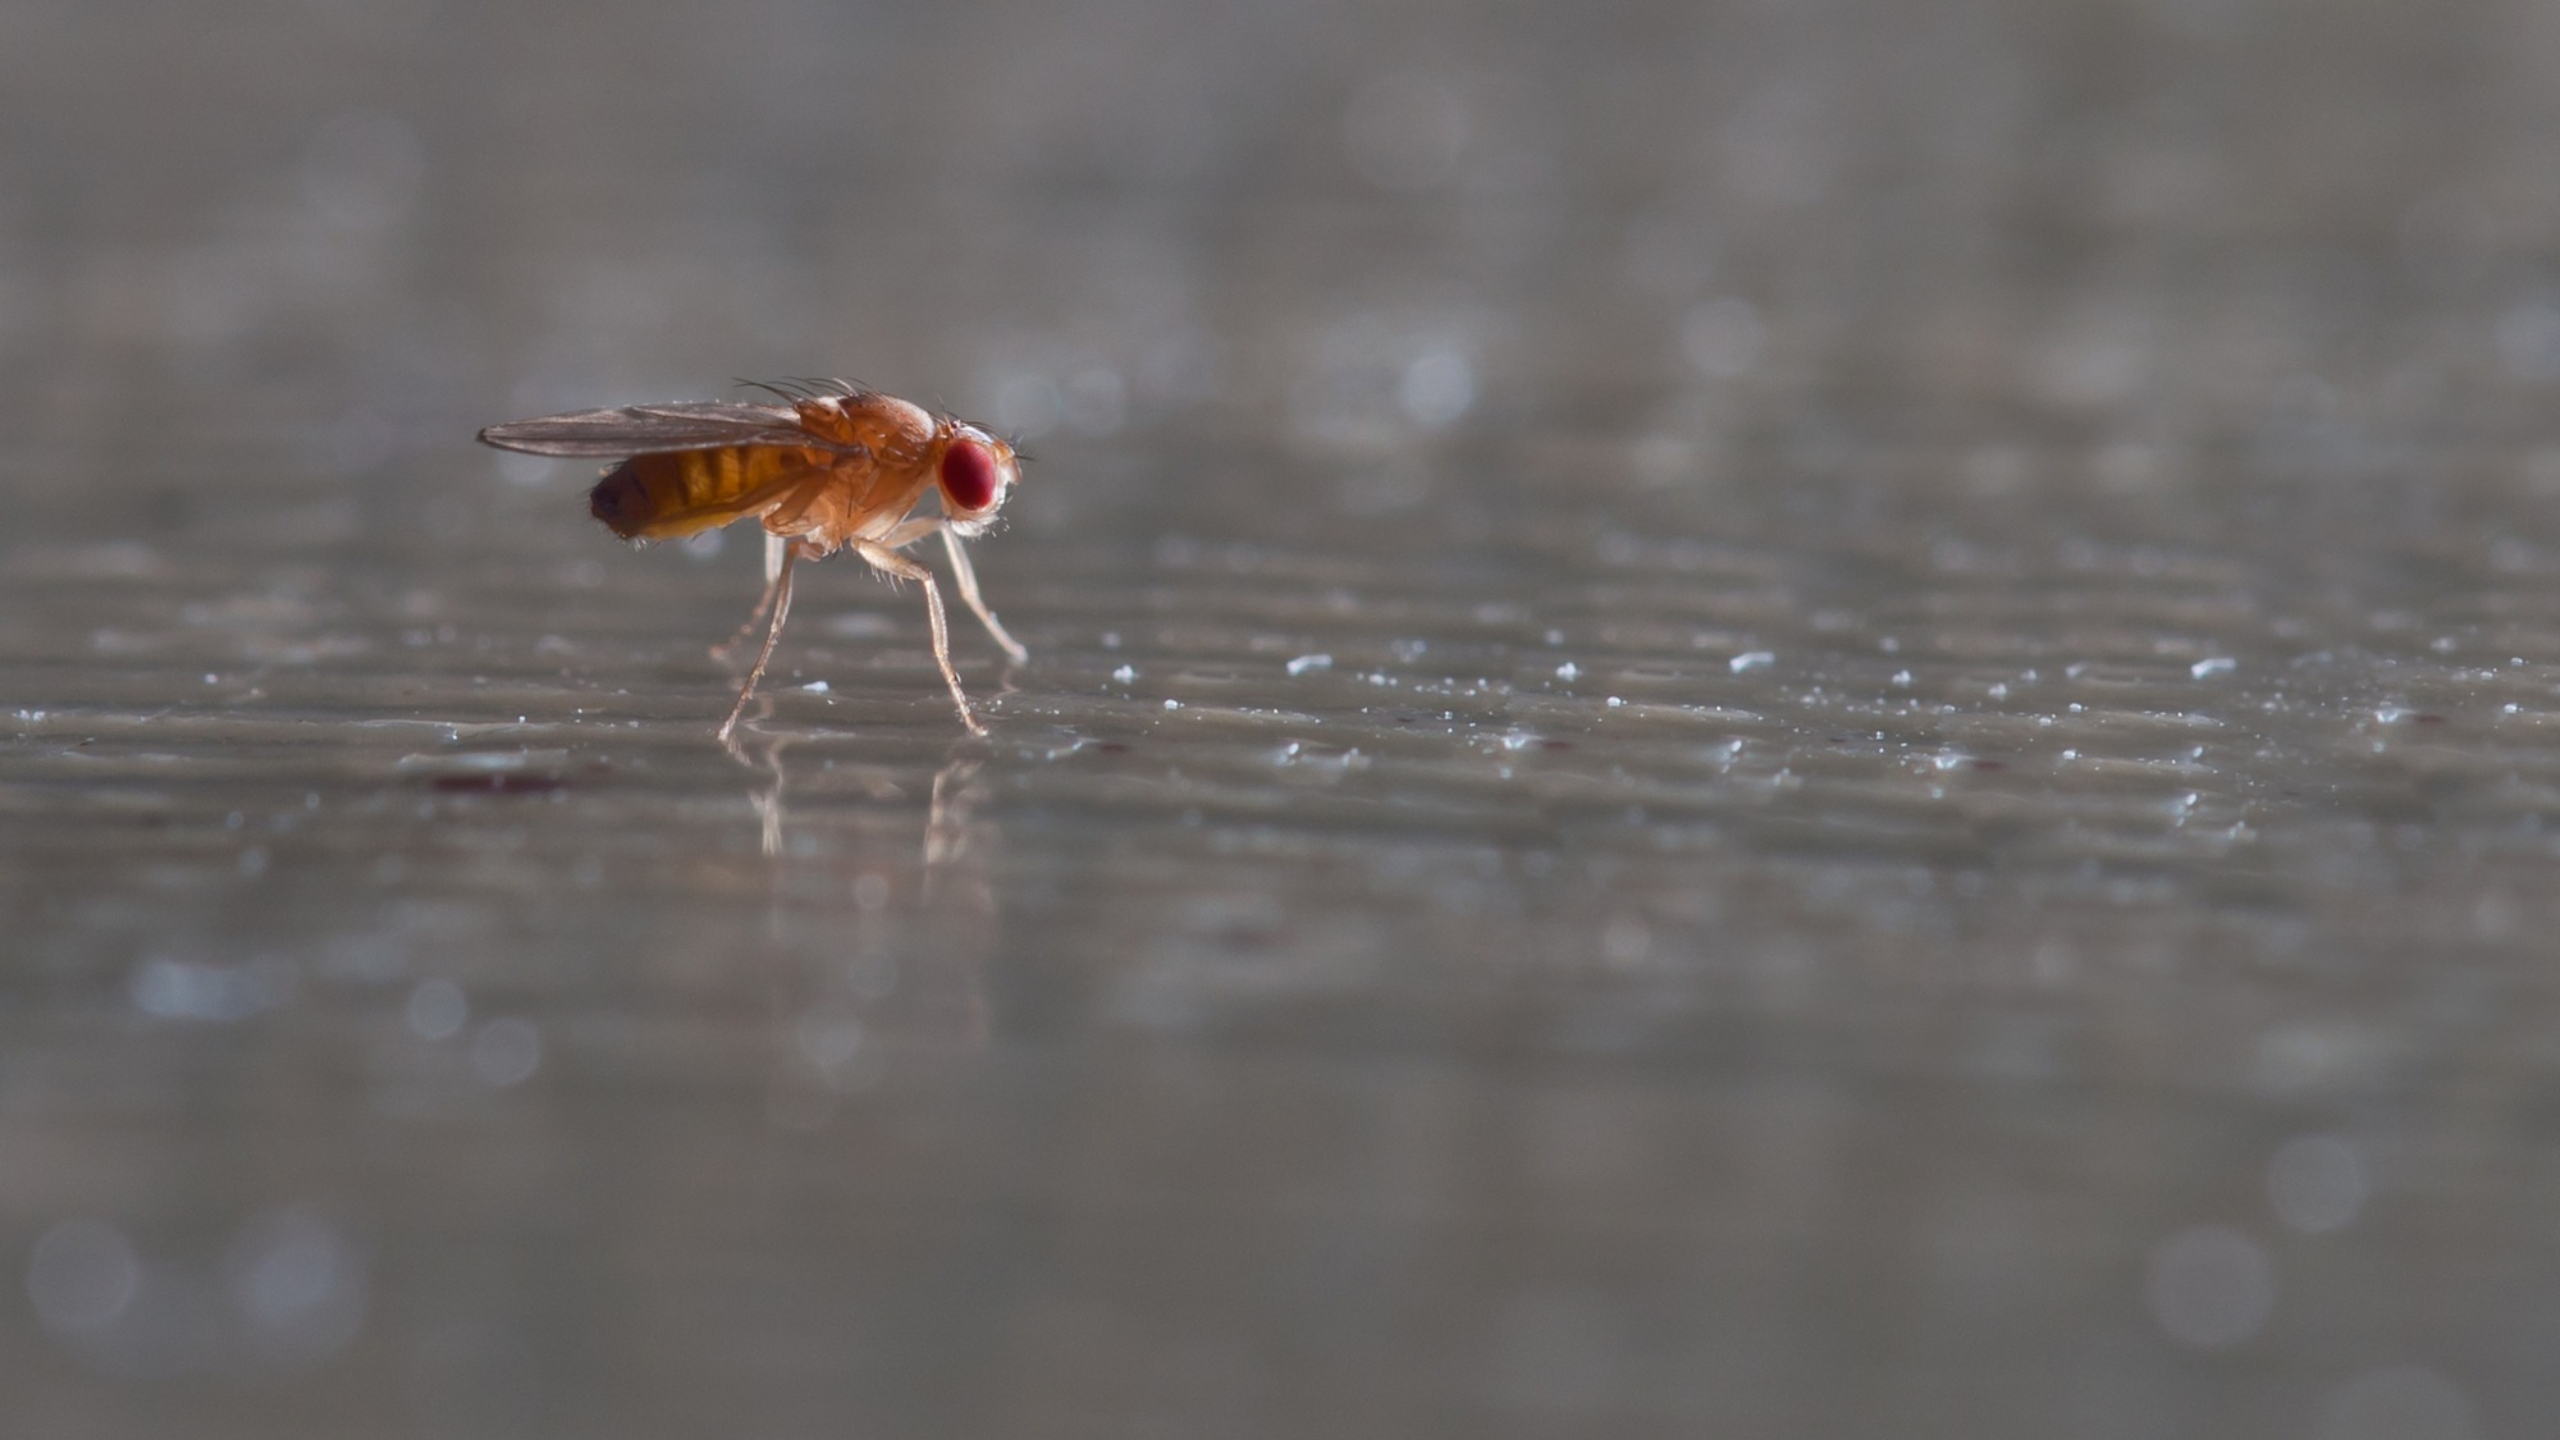 Fruit flies have shorter lives if exposed to their own dead